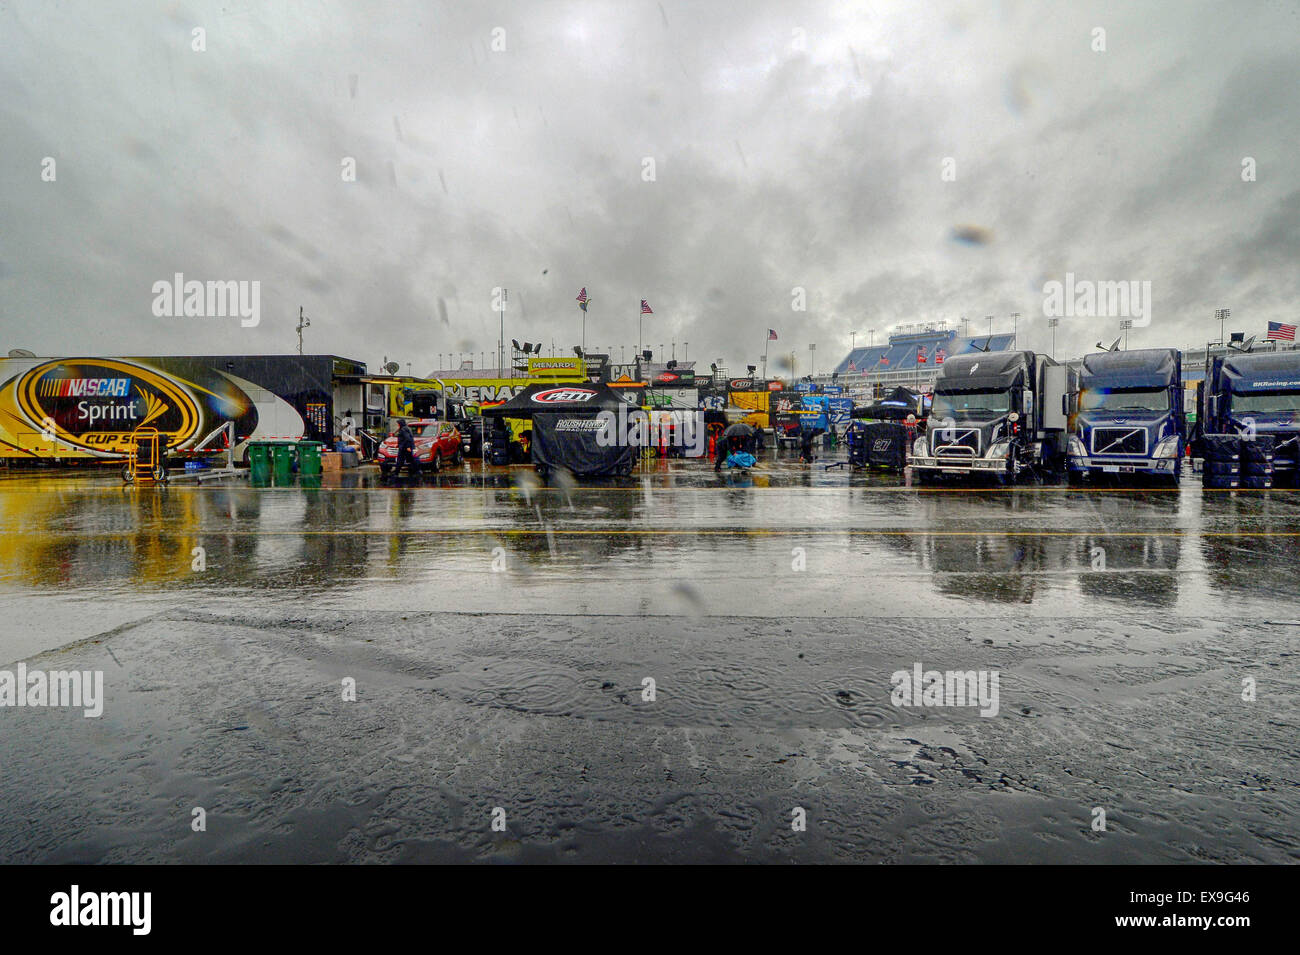 Sparta, KY, USA. 14th Mar, 2015. Sparta, KY - Jul 09, 2015: The Sprint Cup garage waits quietly for the rain to end at Kentucky Speedway in Sparta, KY © csm/Alamy Live News Stock Photo